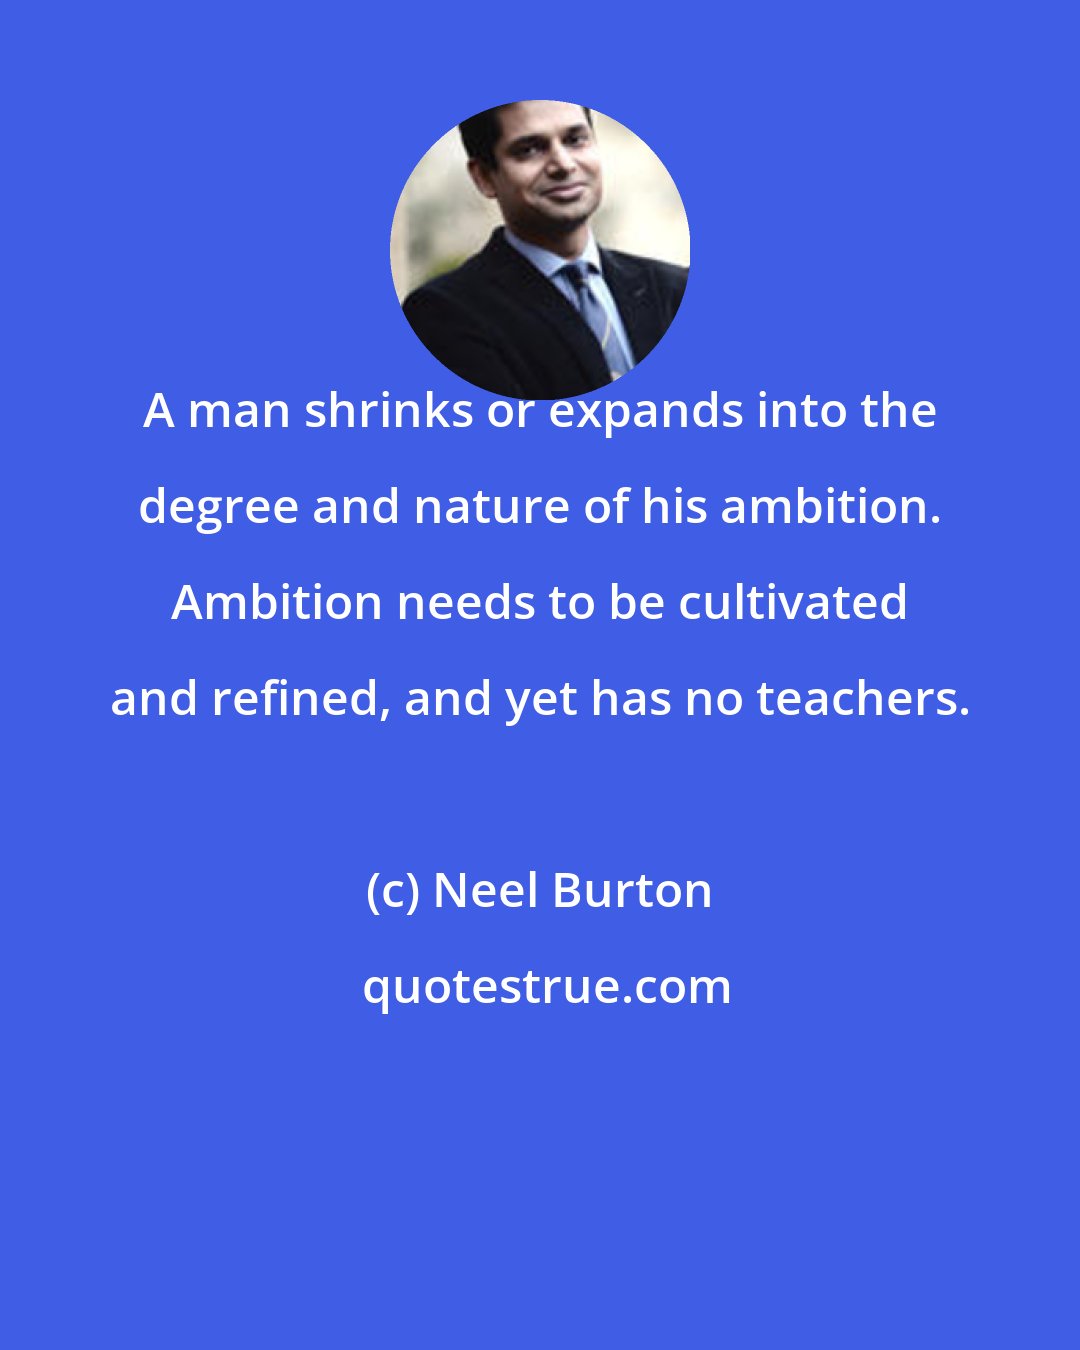 Neel Burton: A man shrinks or expands into the degree and nature of his ambition. Ambition needs to be cultivated and refined, and yet has no teachers.